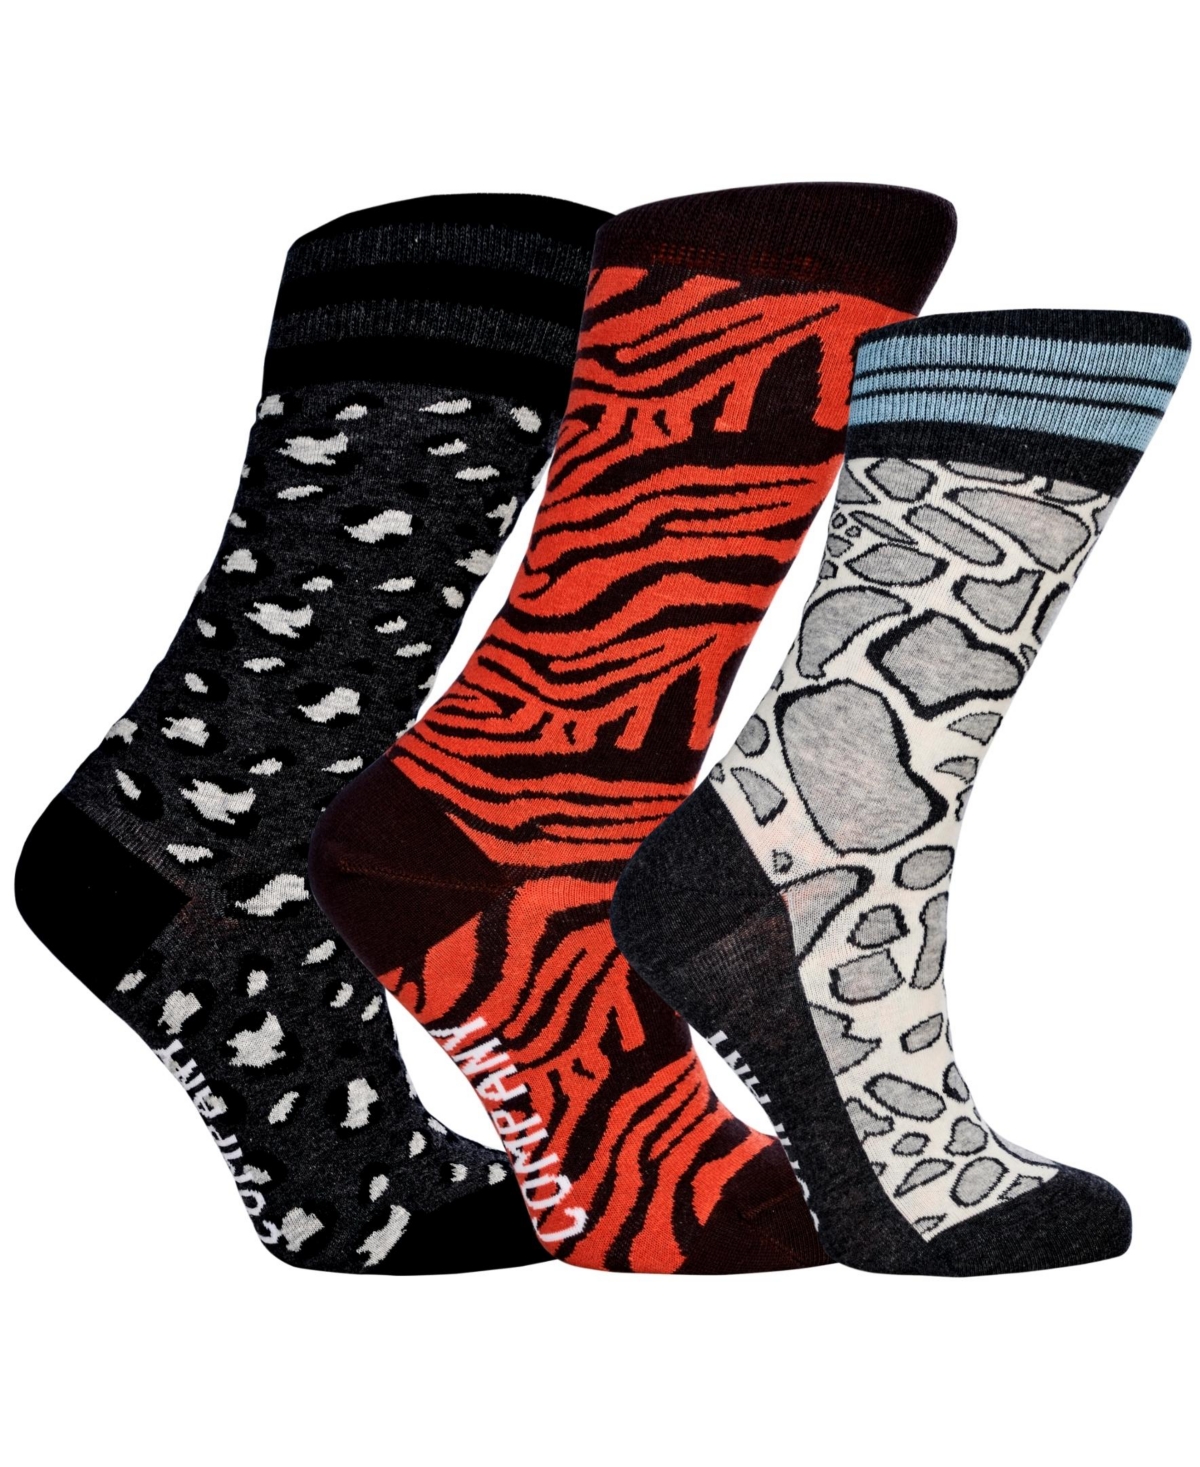 Women's Wild Cats Bundle of Cotton, Seamless Toe Premium Colorful Animal Print Patterned Crew Socks, Pack of 3 - Multi Color